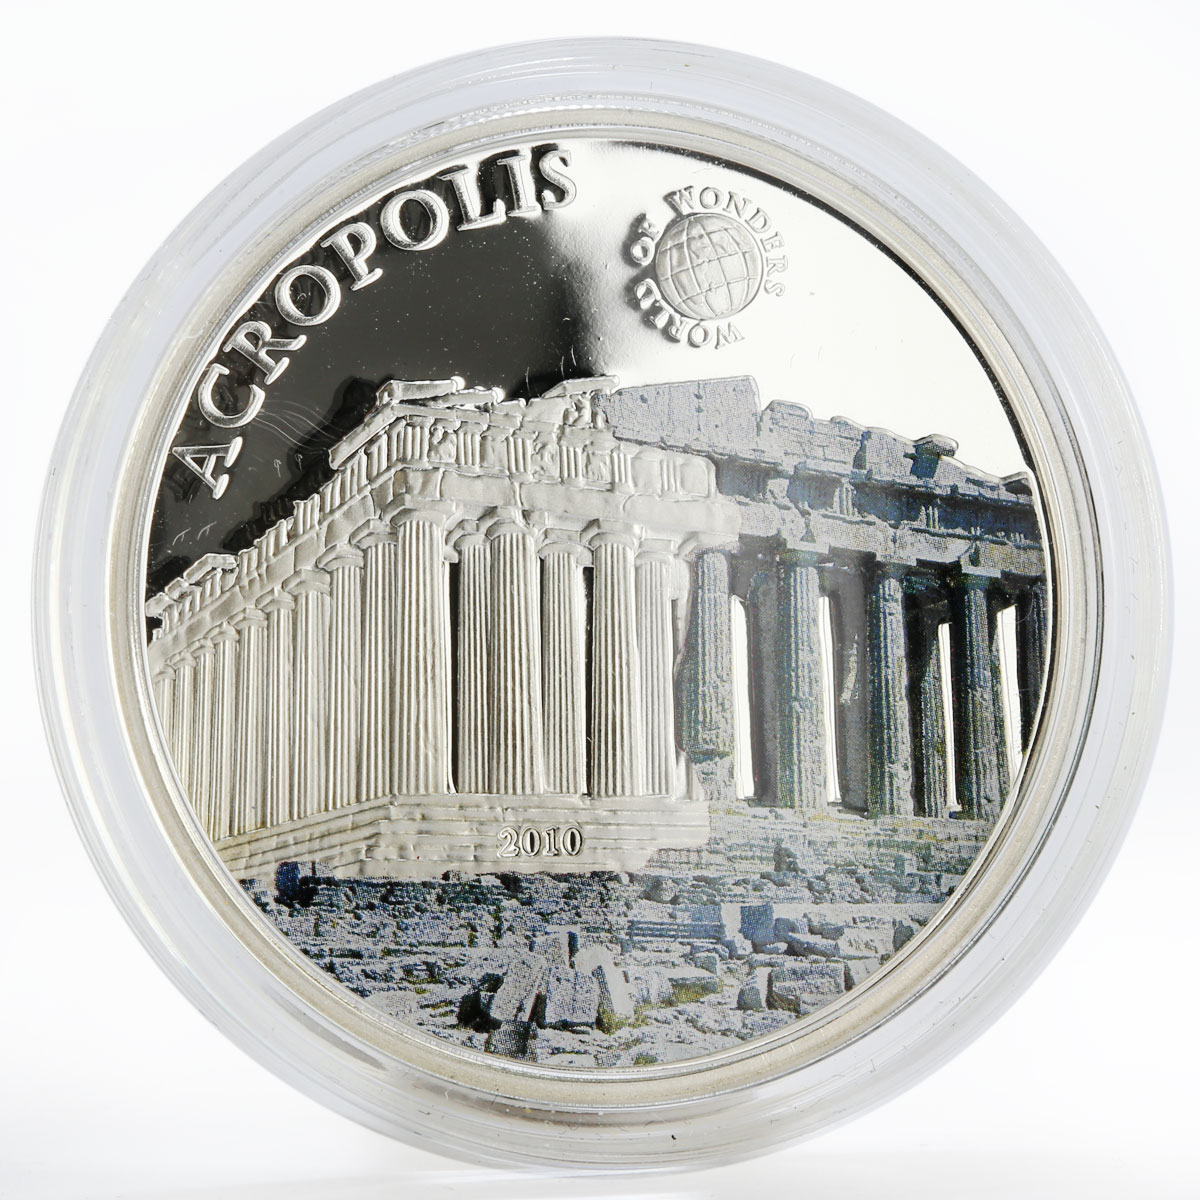 Palau 5 dollars World of Wonders Acropolis Temple Architecture silver coin 2010